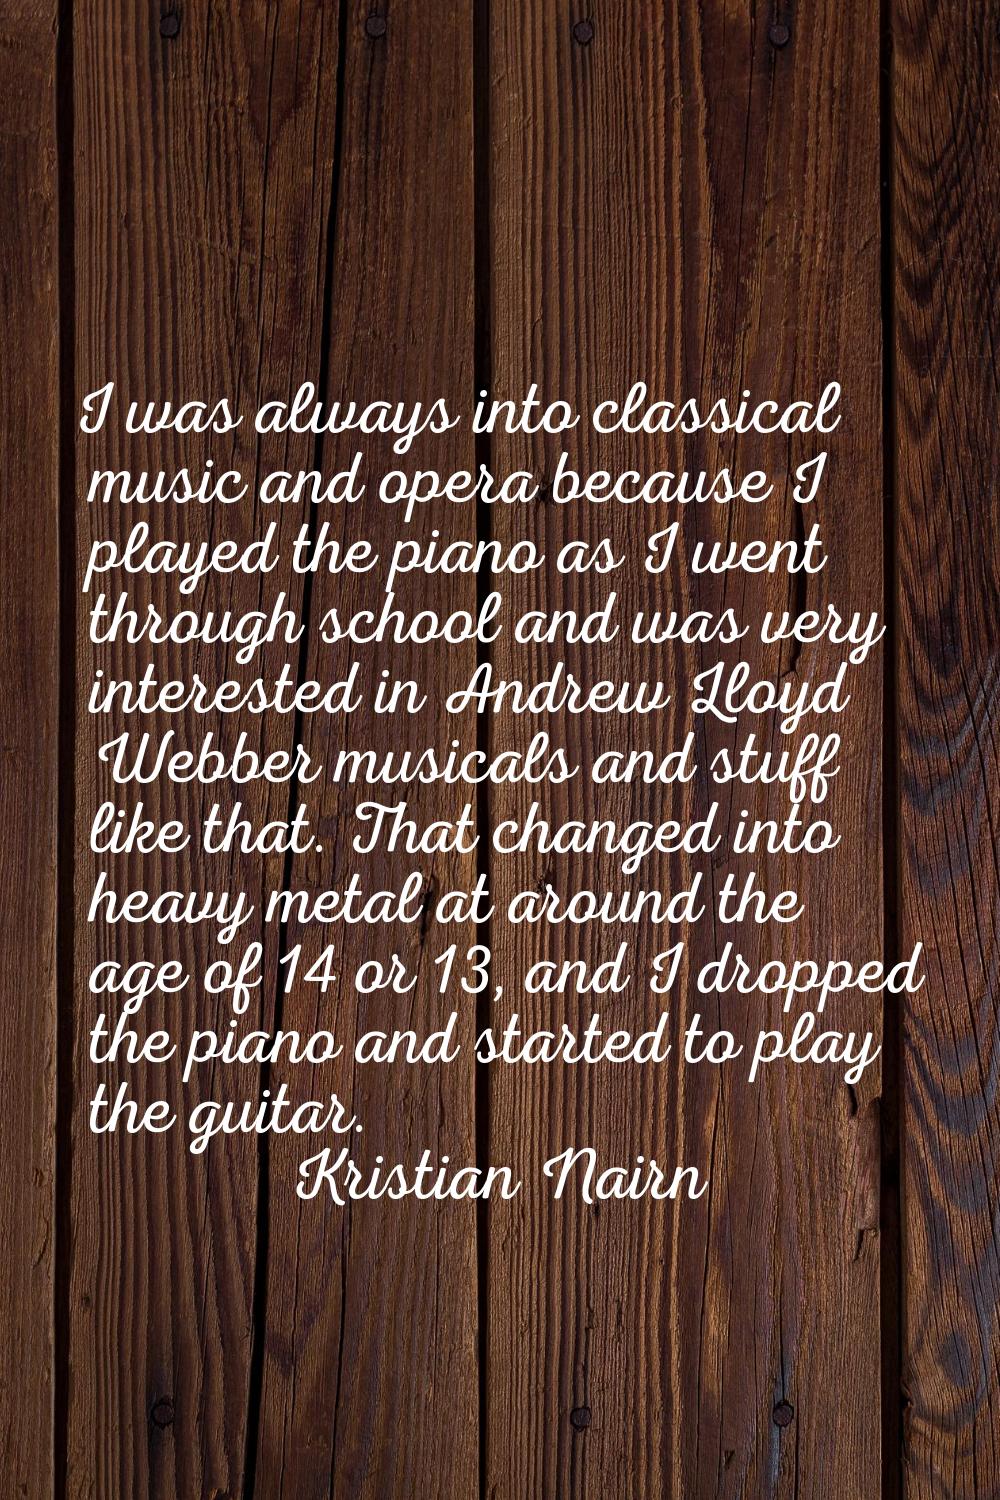 I was always into classical music and opera because I played the piano as I went through school and